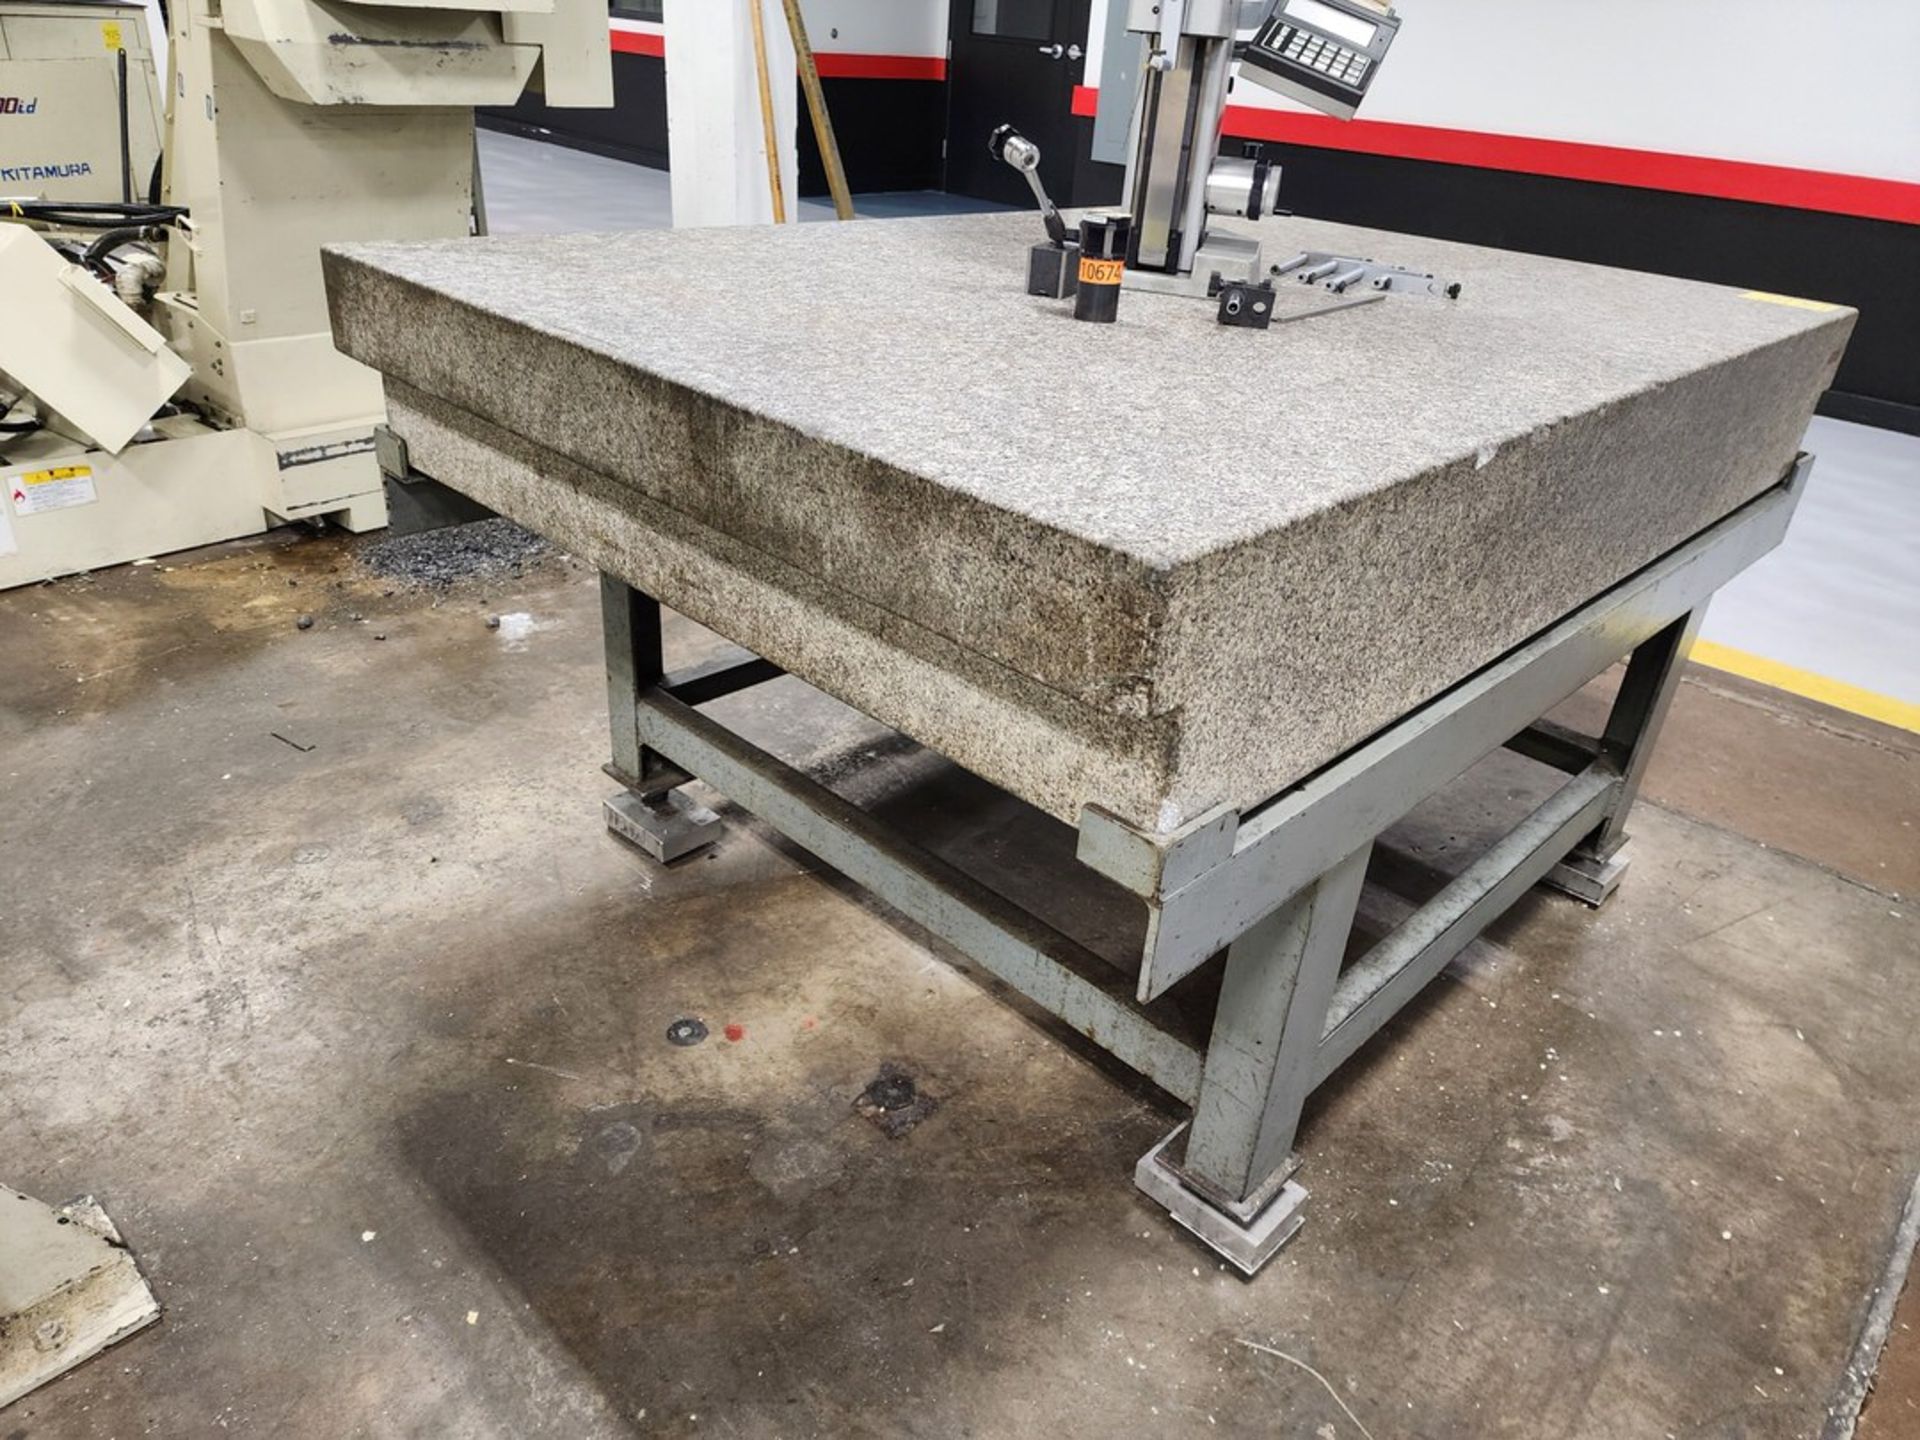 Surface Granite Plate W/ Stand 72"x48" - Image 2 of 5